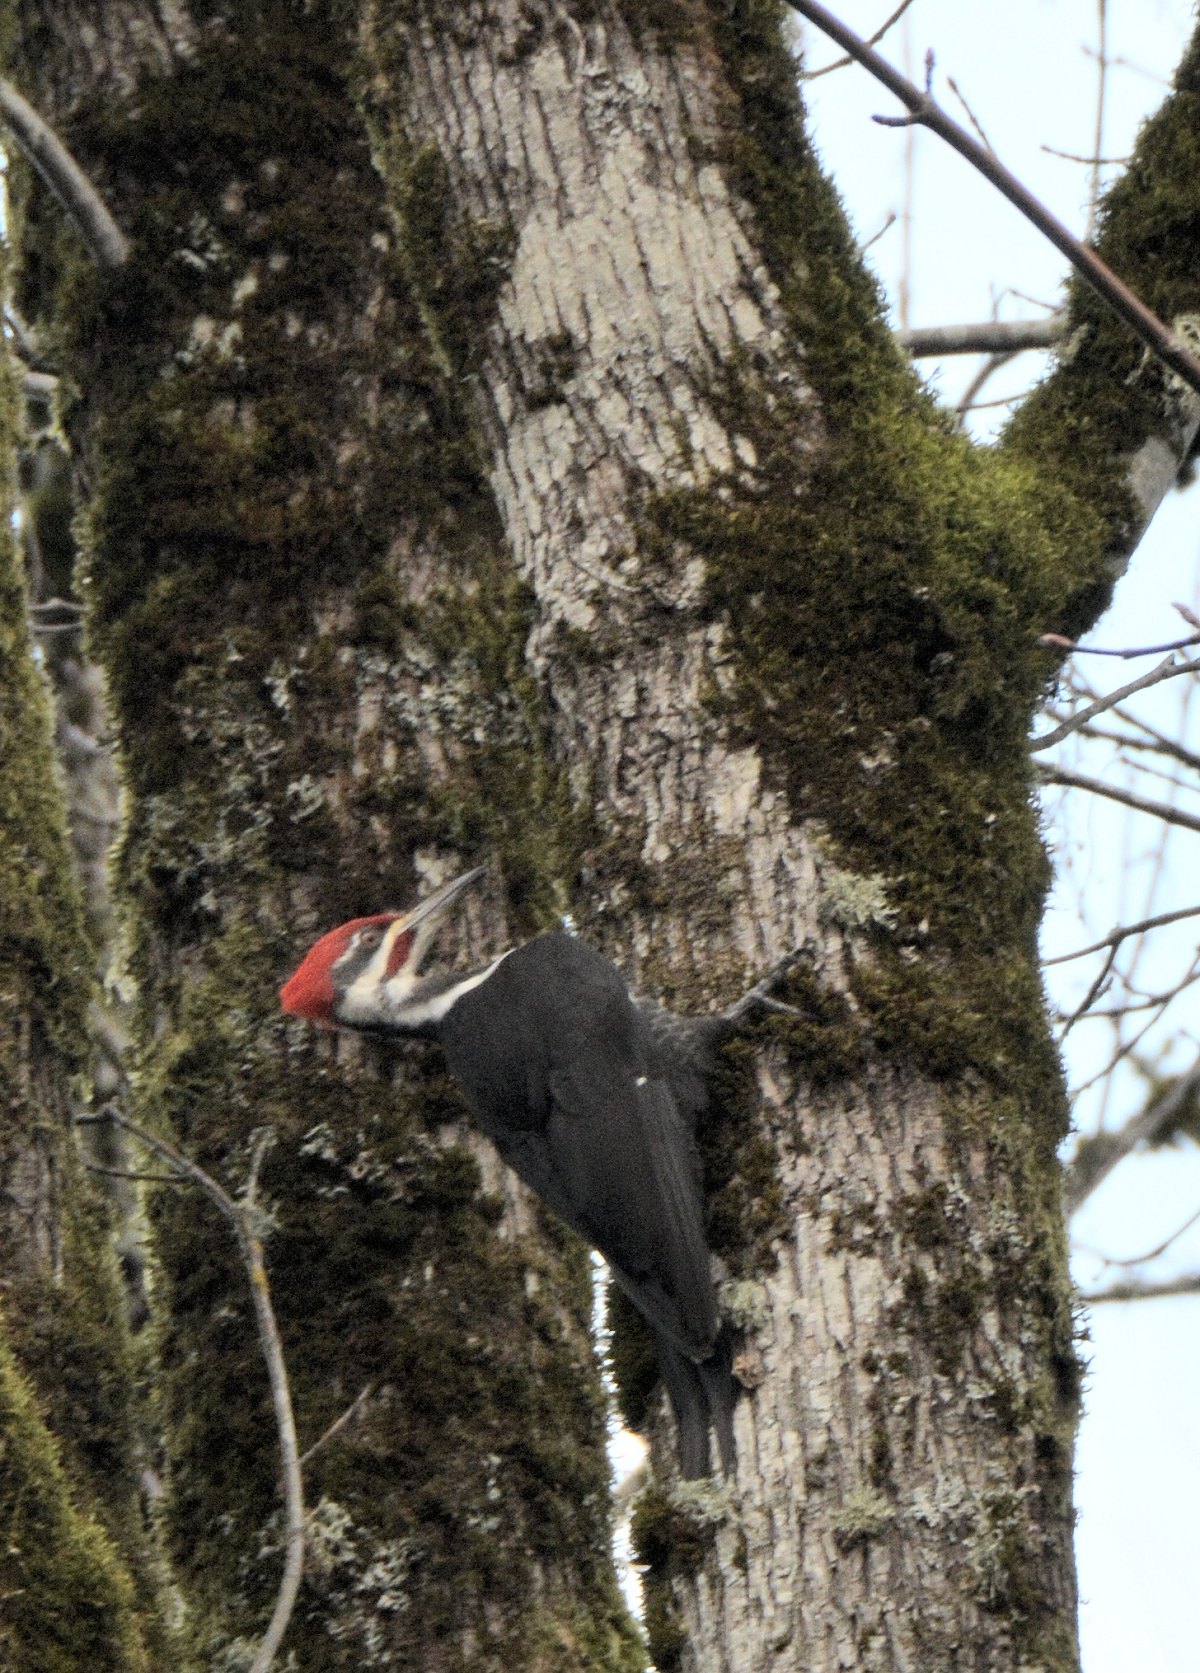 Woodpecker - from the Dirt Biking with Miriam and Rodney photo gallery.